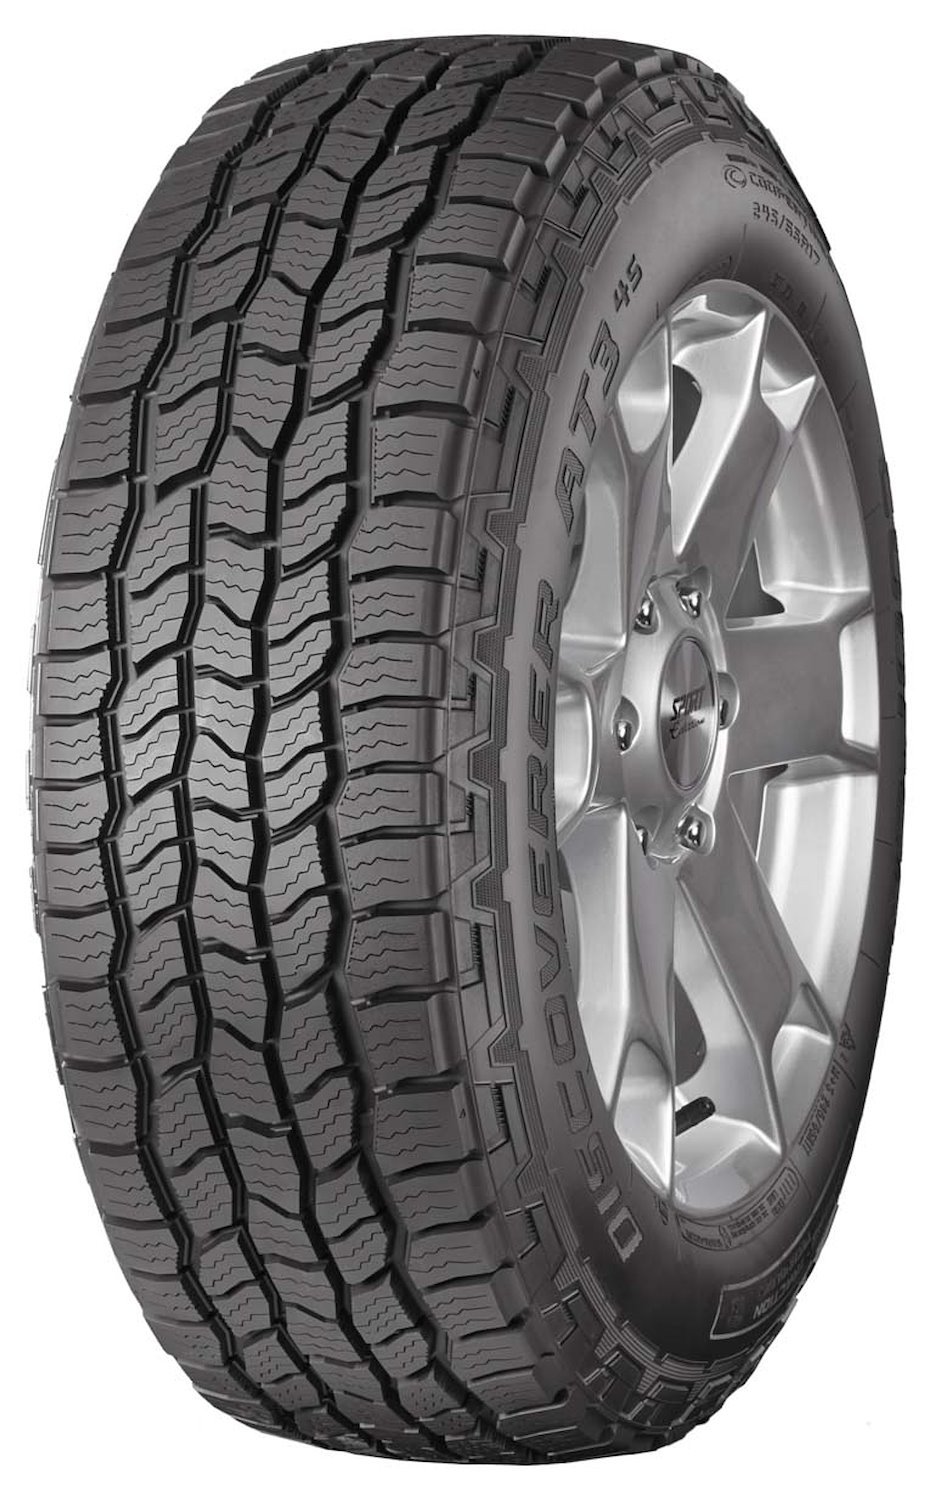 Discoverer AT3 4S All-Terrain Tire, 225/75R16